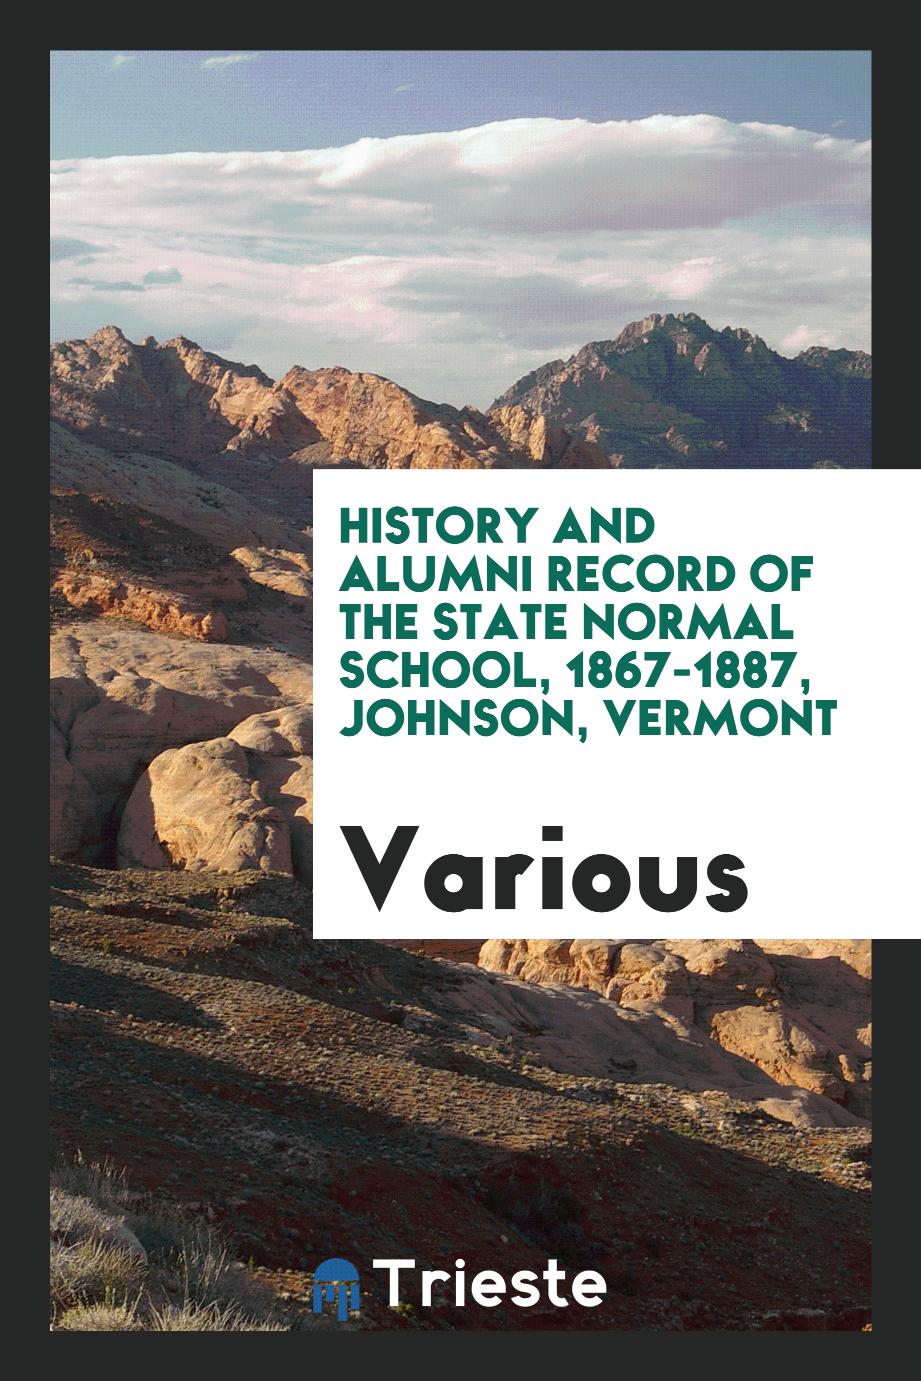 History and Alumni Record of the State Normal School, 1867-1887, Johnson, Vermont